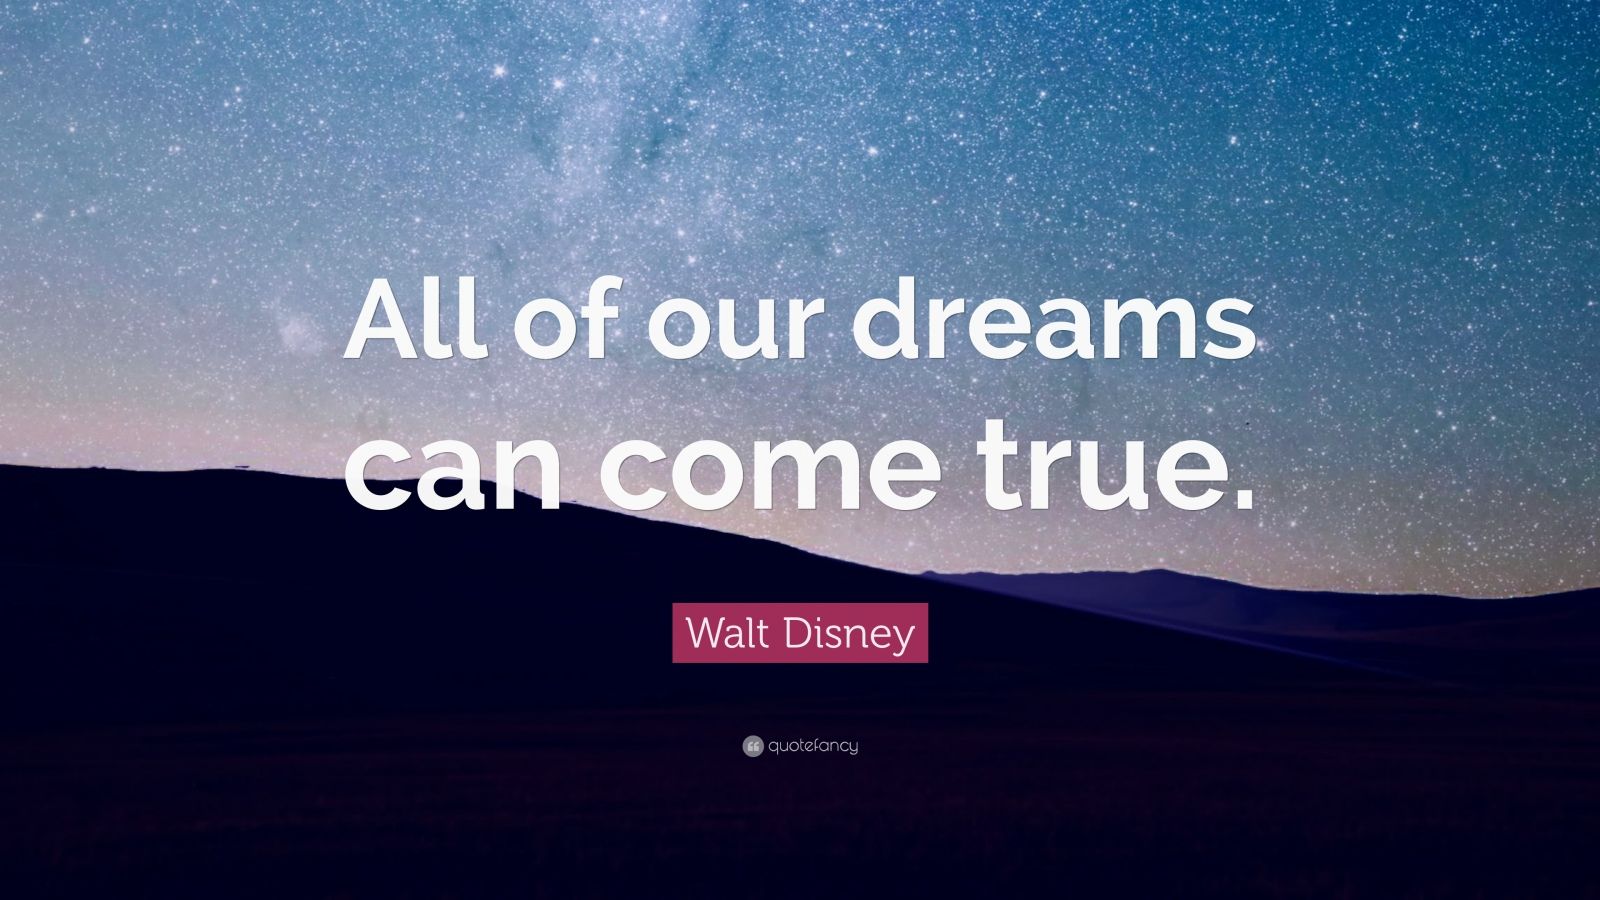 Walt Disney Quote: “All of our dreams can come true.” (23 wallpapers